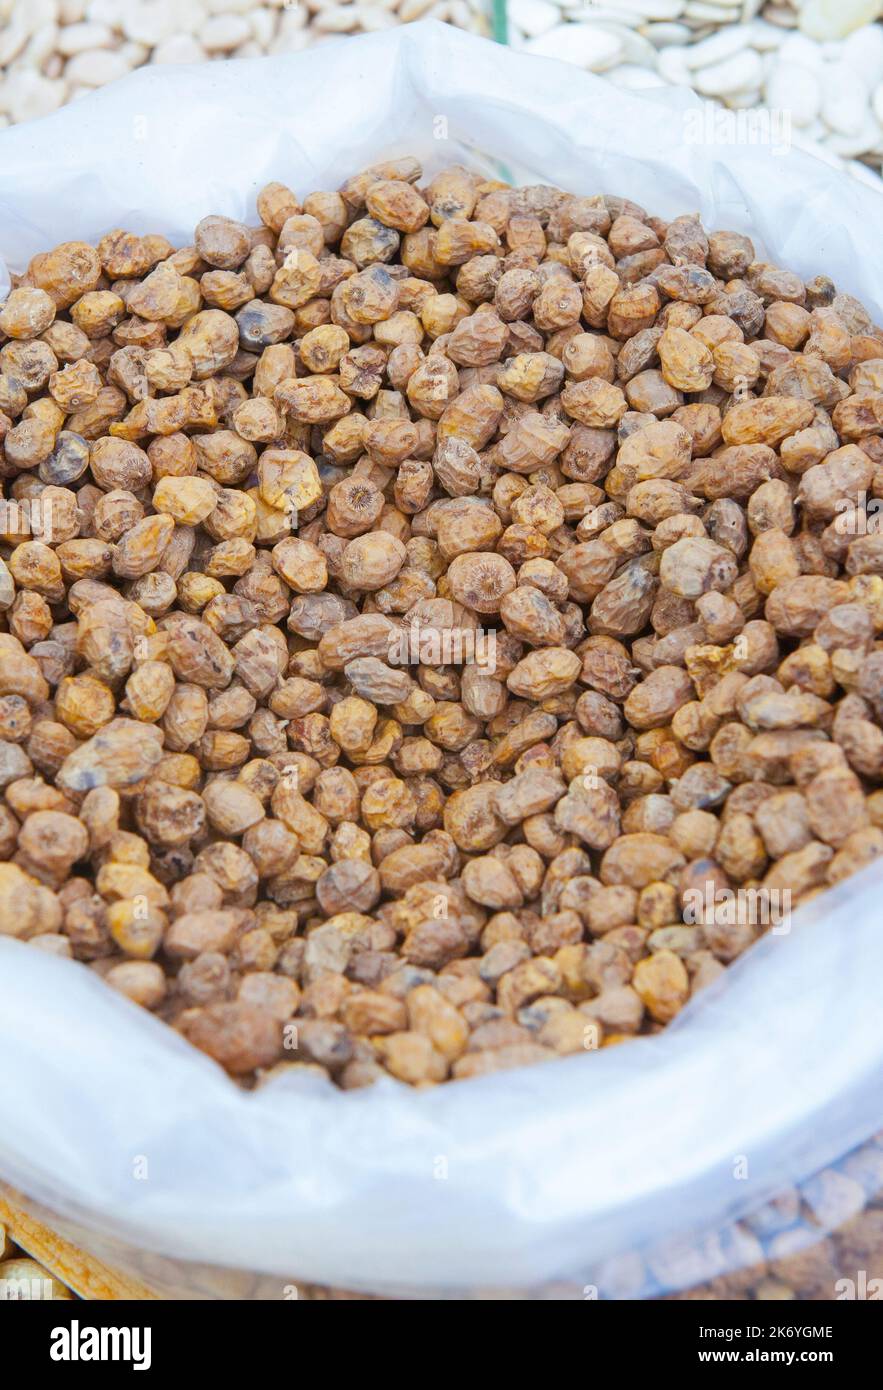 Rolled up sack full of tiger nuts or chufas. Displayed at street market stall Stock Photo